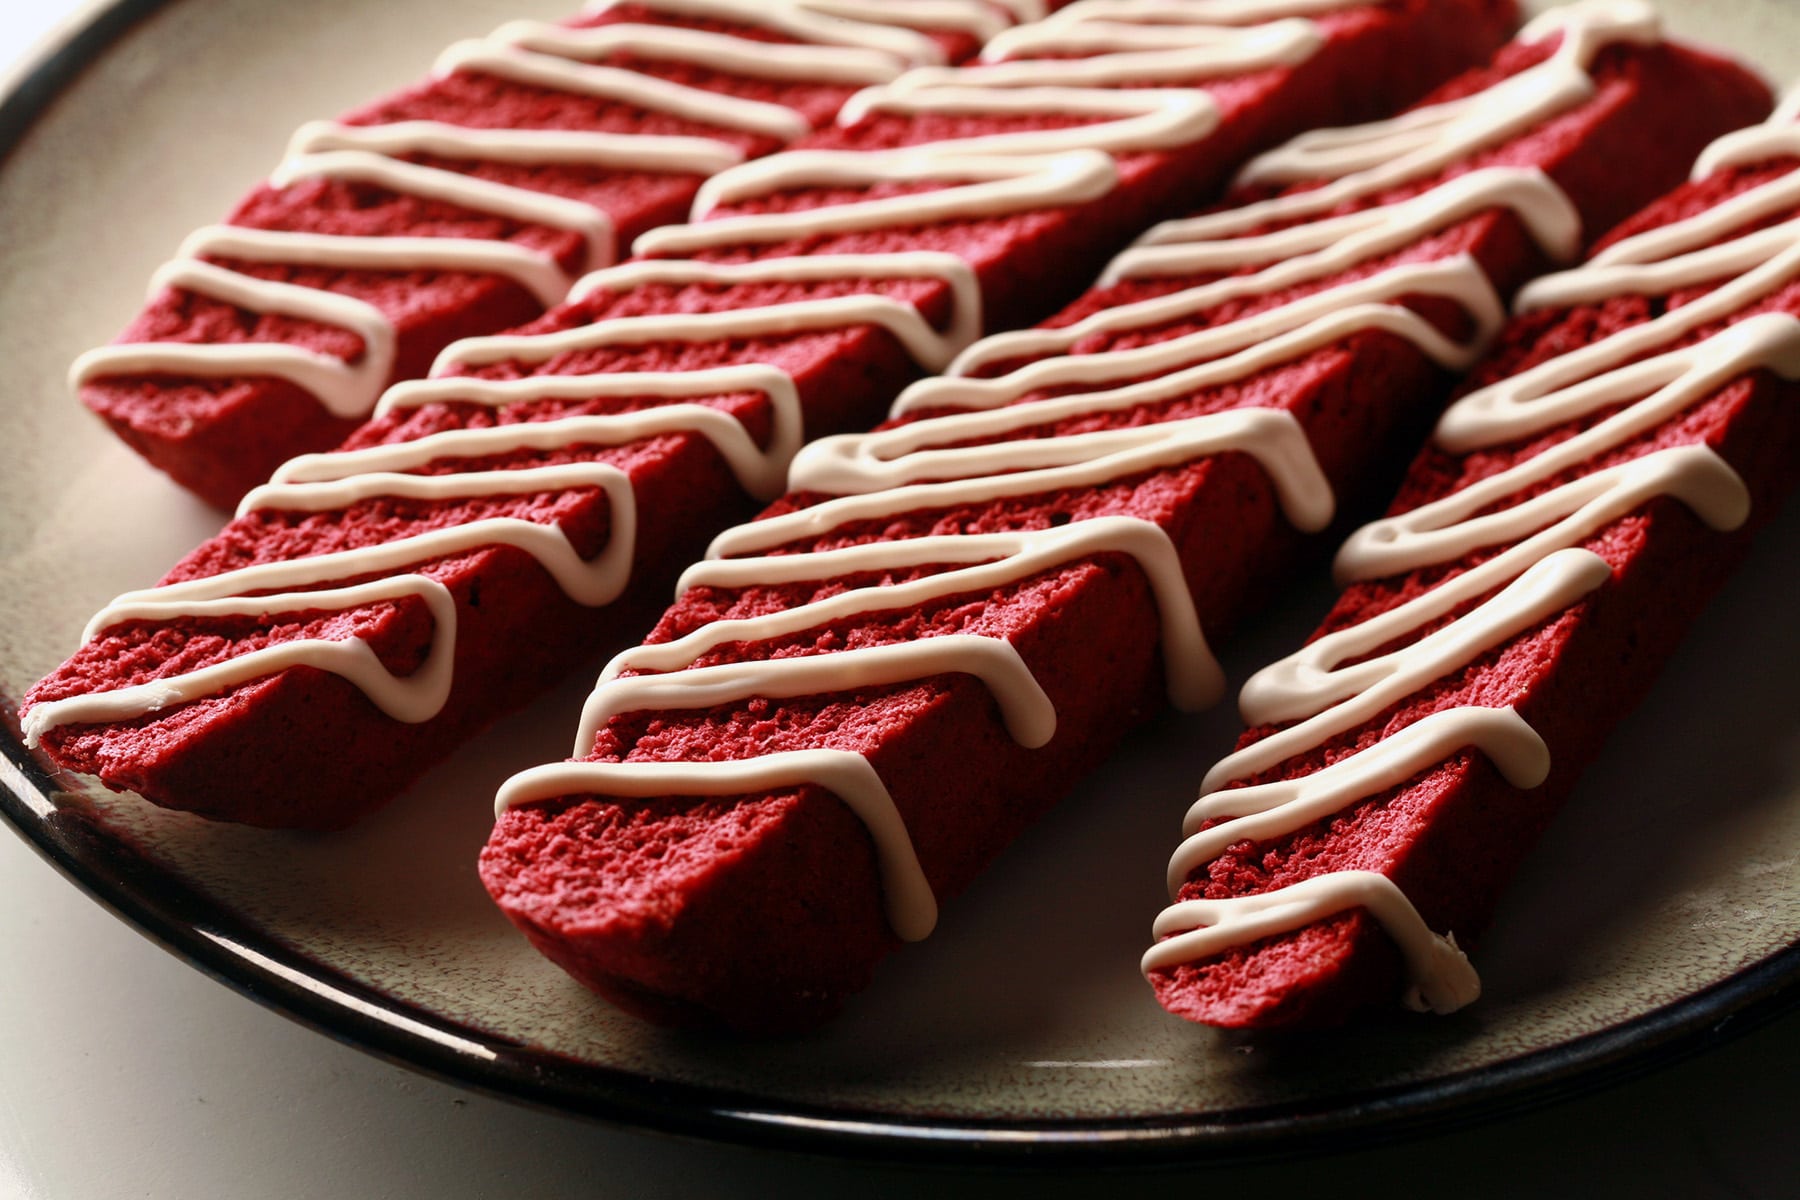 4 red velvet biscotti on a plate. They are each drizzled with a white glaze.